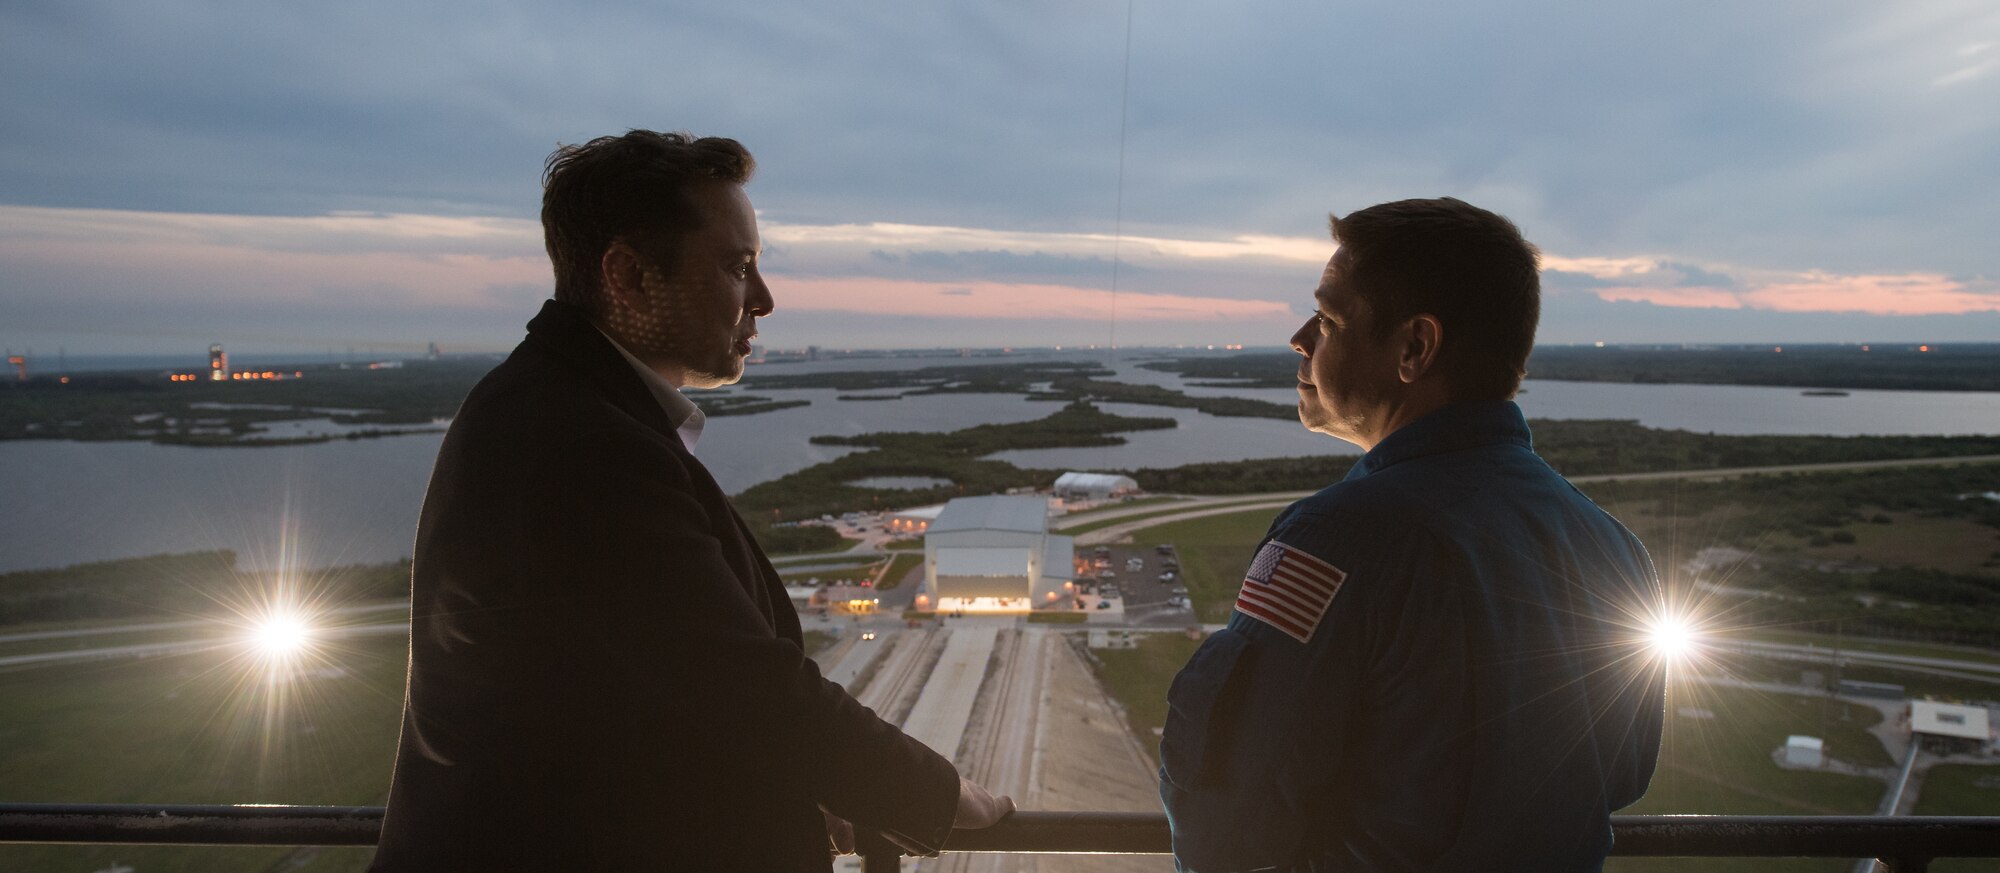 SpaceX CEO and Chief Designer Elon Musk, left, speaks with NASA astronaut Bob Behnken on the fixed service structure of Launch Complex 39A during a tour before the early Sunday morning launch of the Demo-1 mission, Friday, March 1, 2019 at the Kennedy Space Center in Florida. The Demo-1 mission launched at 2:49am ET on Saturday, March 2 and was the first launch of a commercially built and operated American spacecraft and space system designed for humans as part of NASA's Commercial Crew Program. The mission will serve as an end-to-end test of the system's capabilities. Behnken and fellow NASA astronaut Doug Hurley are assigned to fly onboard Crew Dragon for the Demo-2 mission. Photo Credit: (NASA/Joel Kowsky)